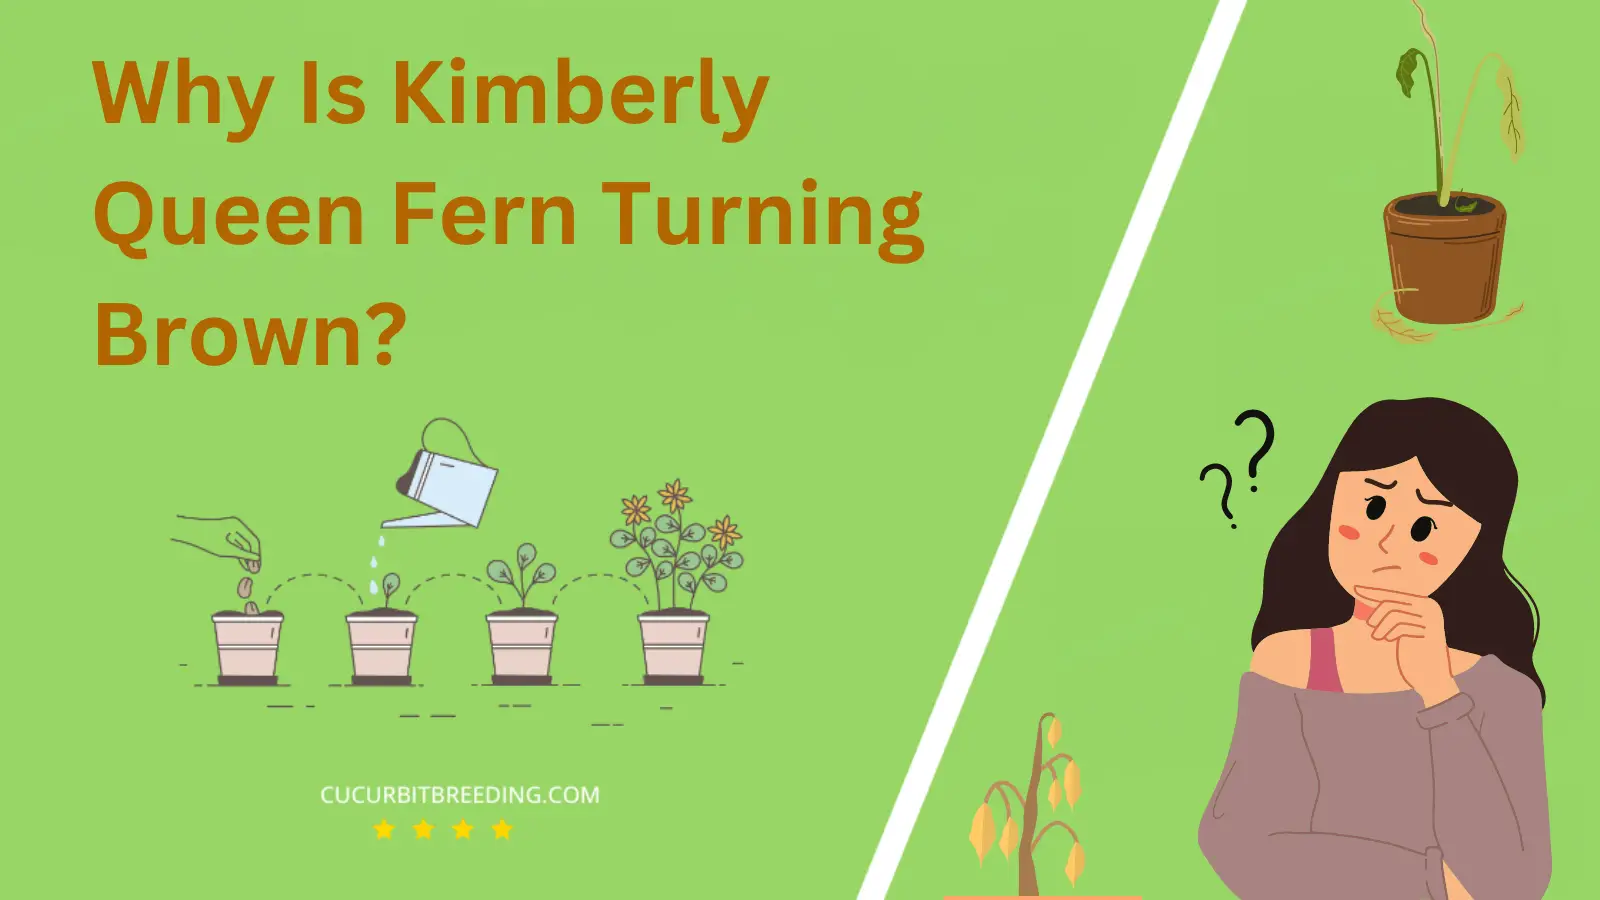 Why Is Kimberly Queen Fern Turning Brown